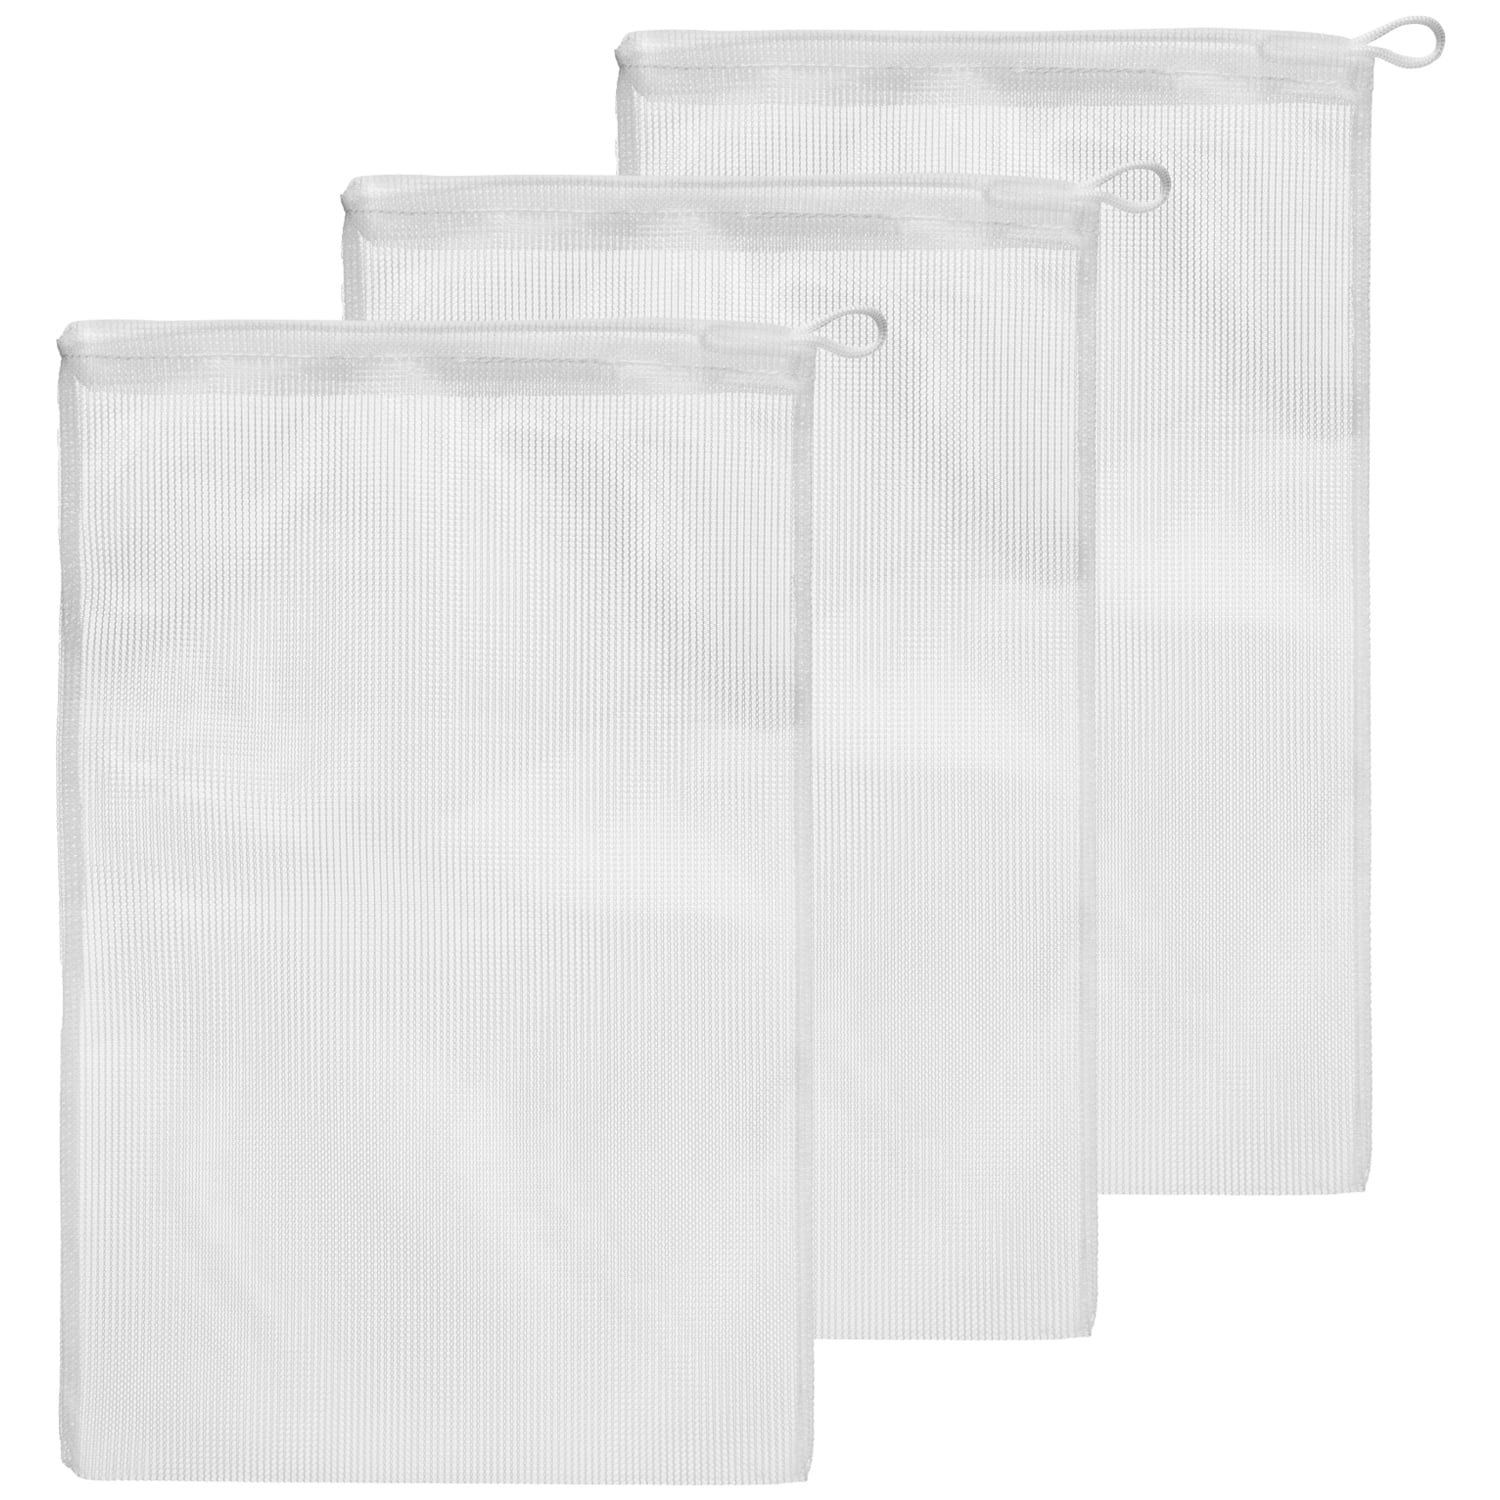 Large Aquarium Mesh Media Filter Bags High Flow 500 micron New 8" by 12" .. 